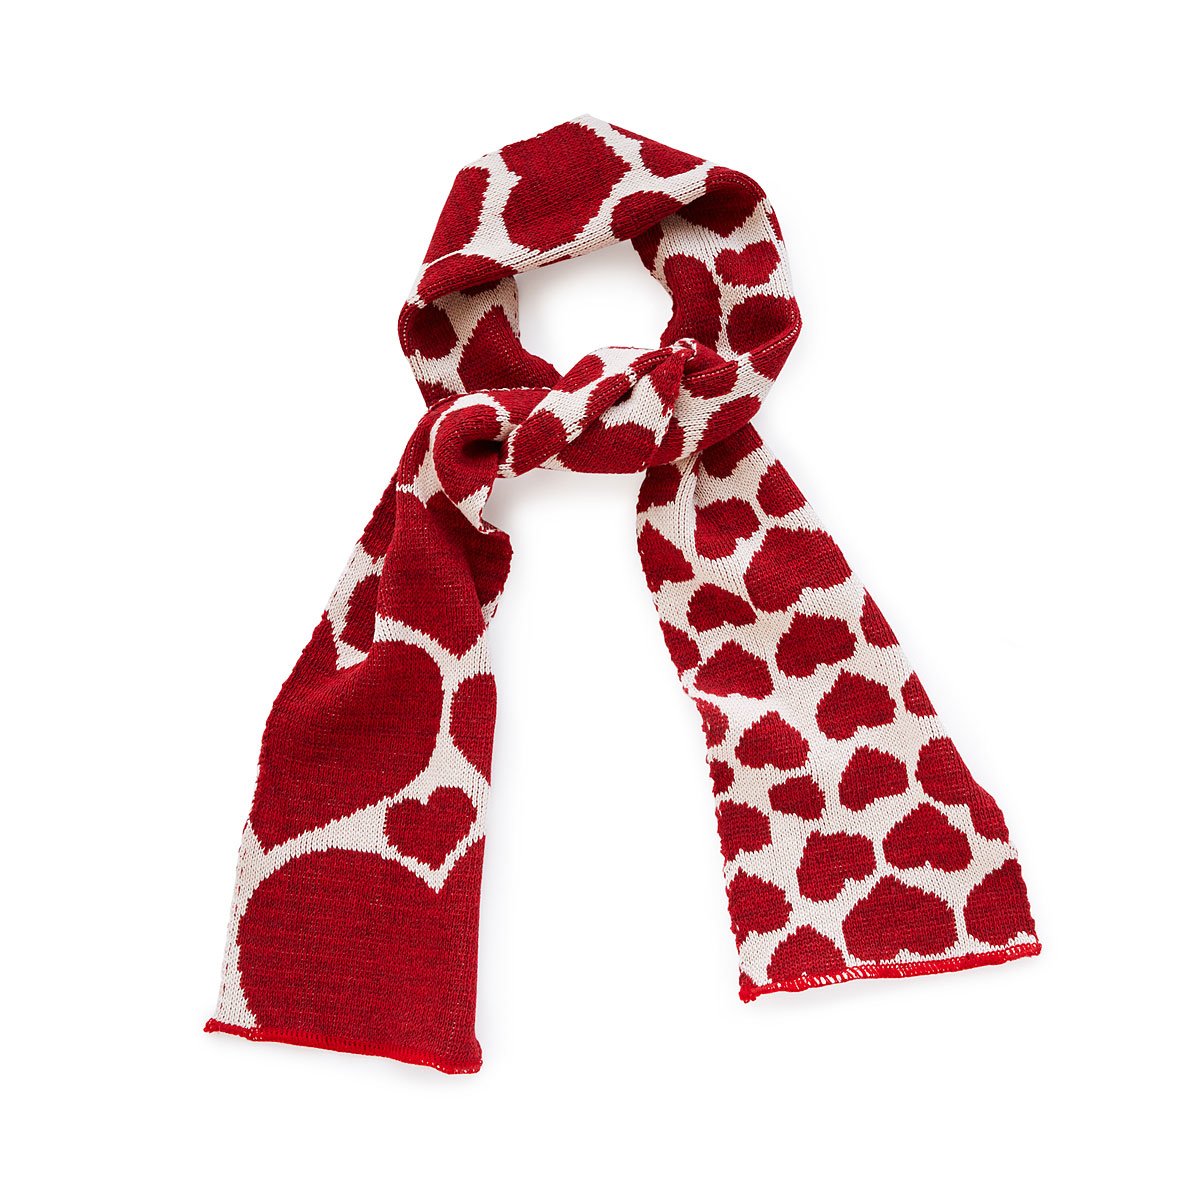 Heart Scarf knit hearts UncommonGoods